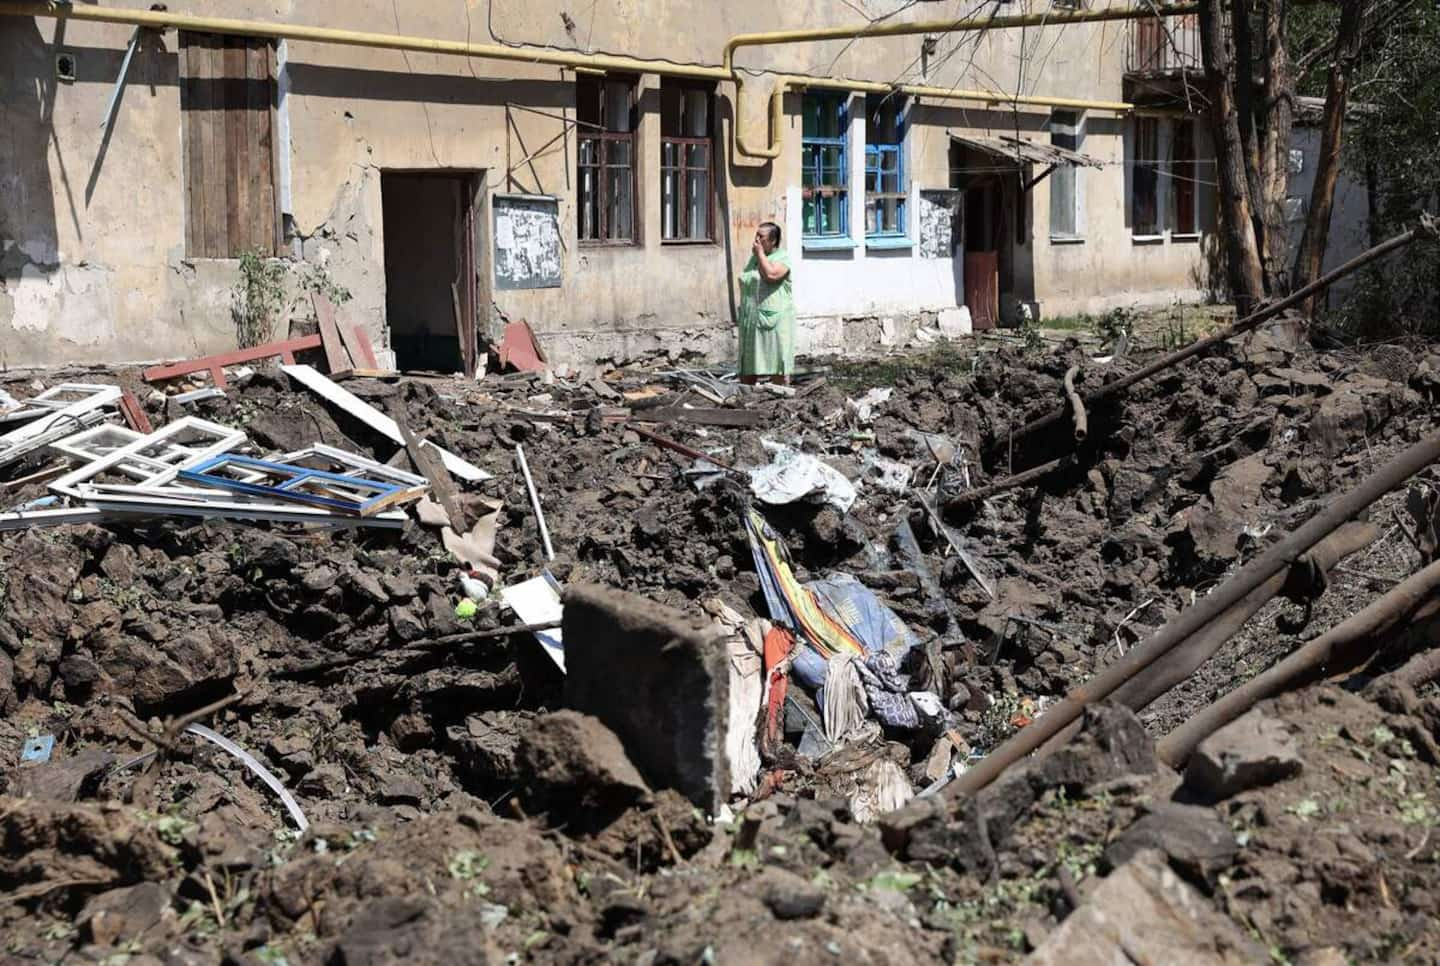 Ukraine: six dead in a Russian bombardment in Toretsk (east), according to the authorities